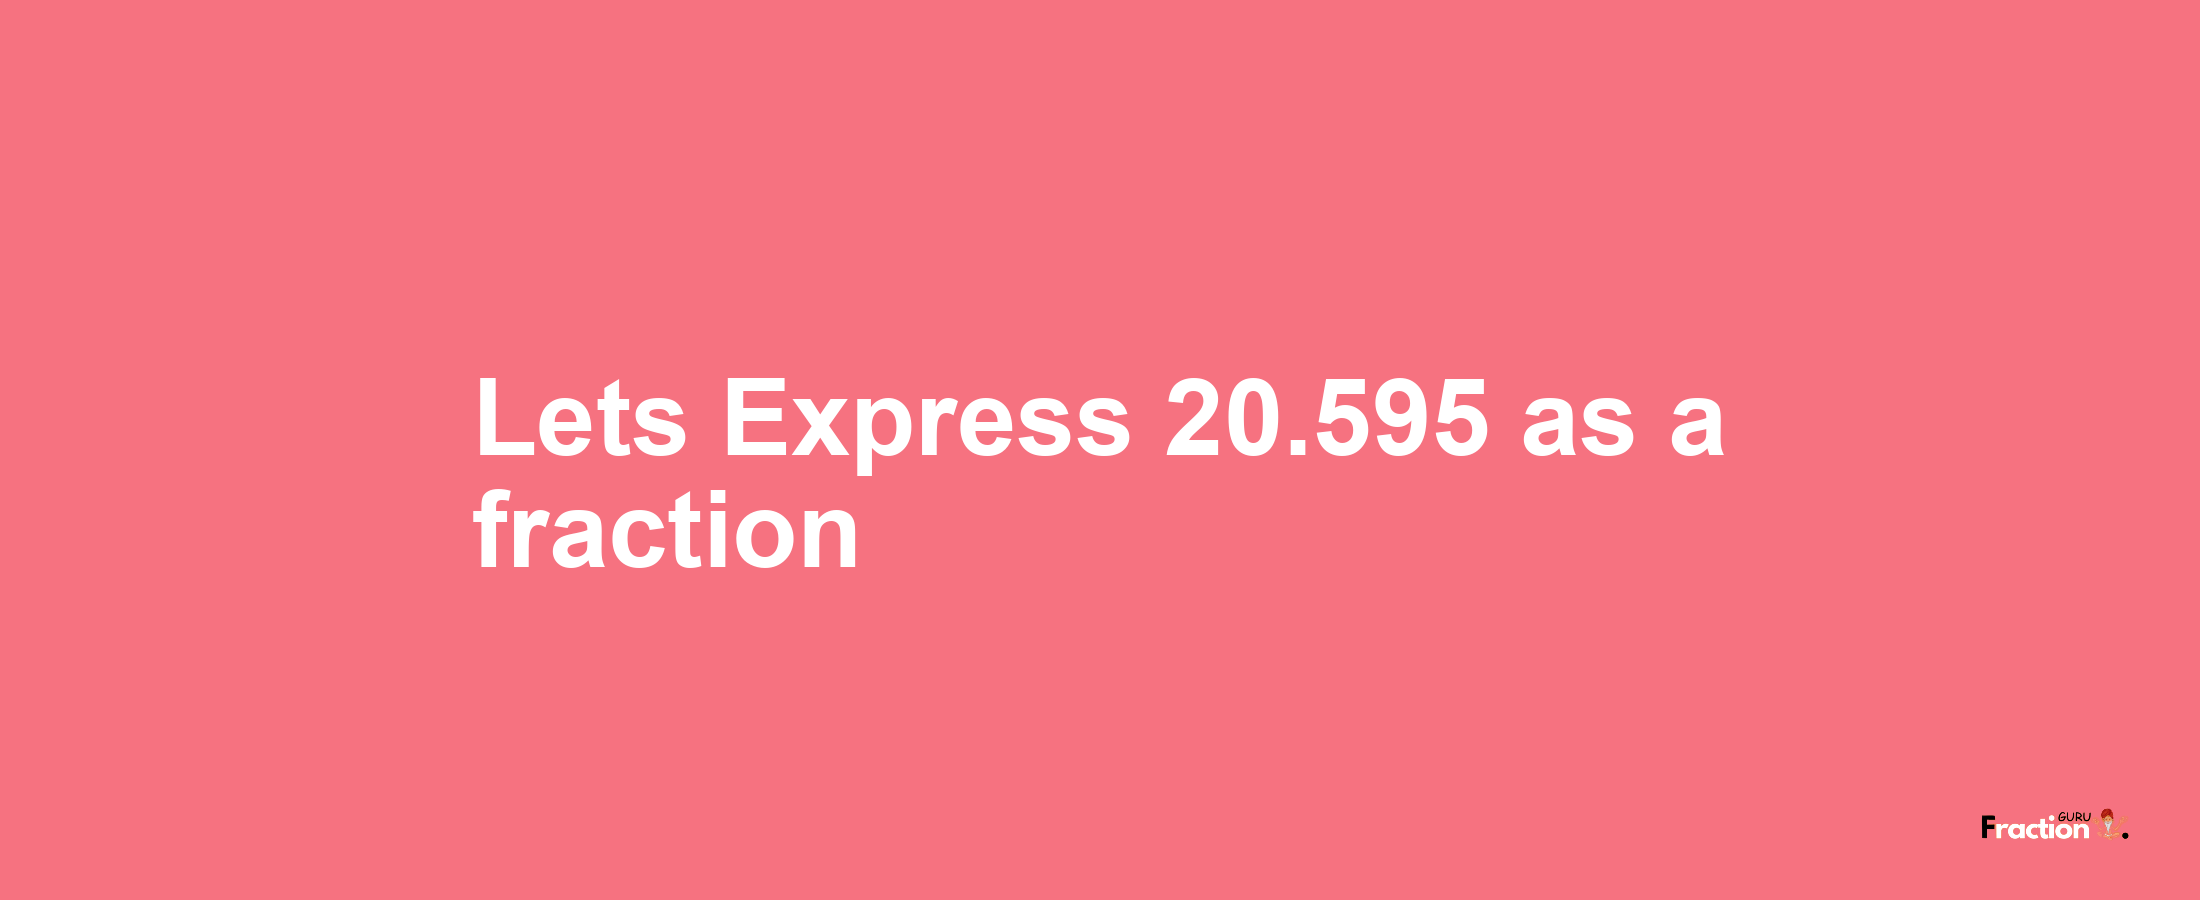 Lets Express 20.595 as afraction